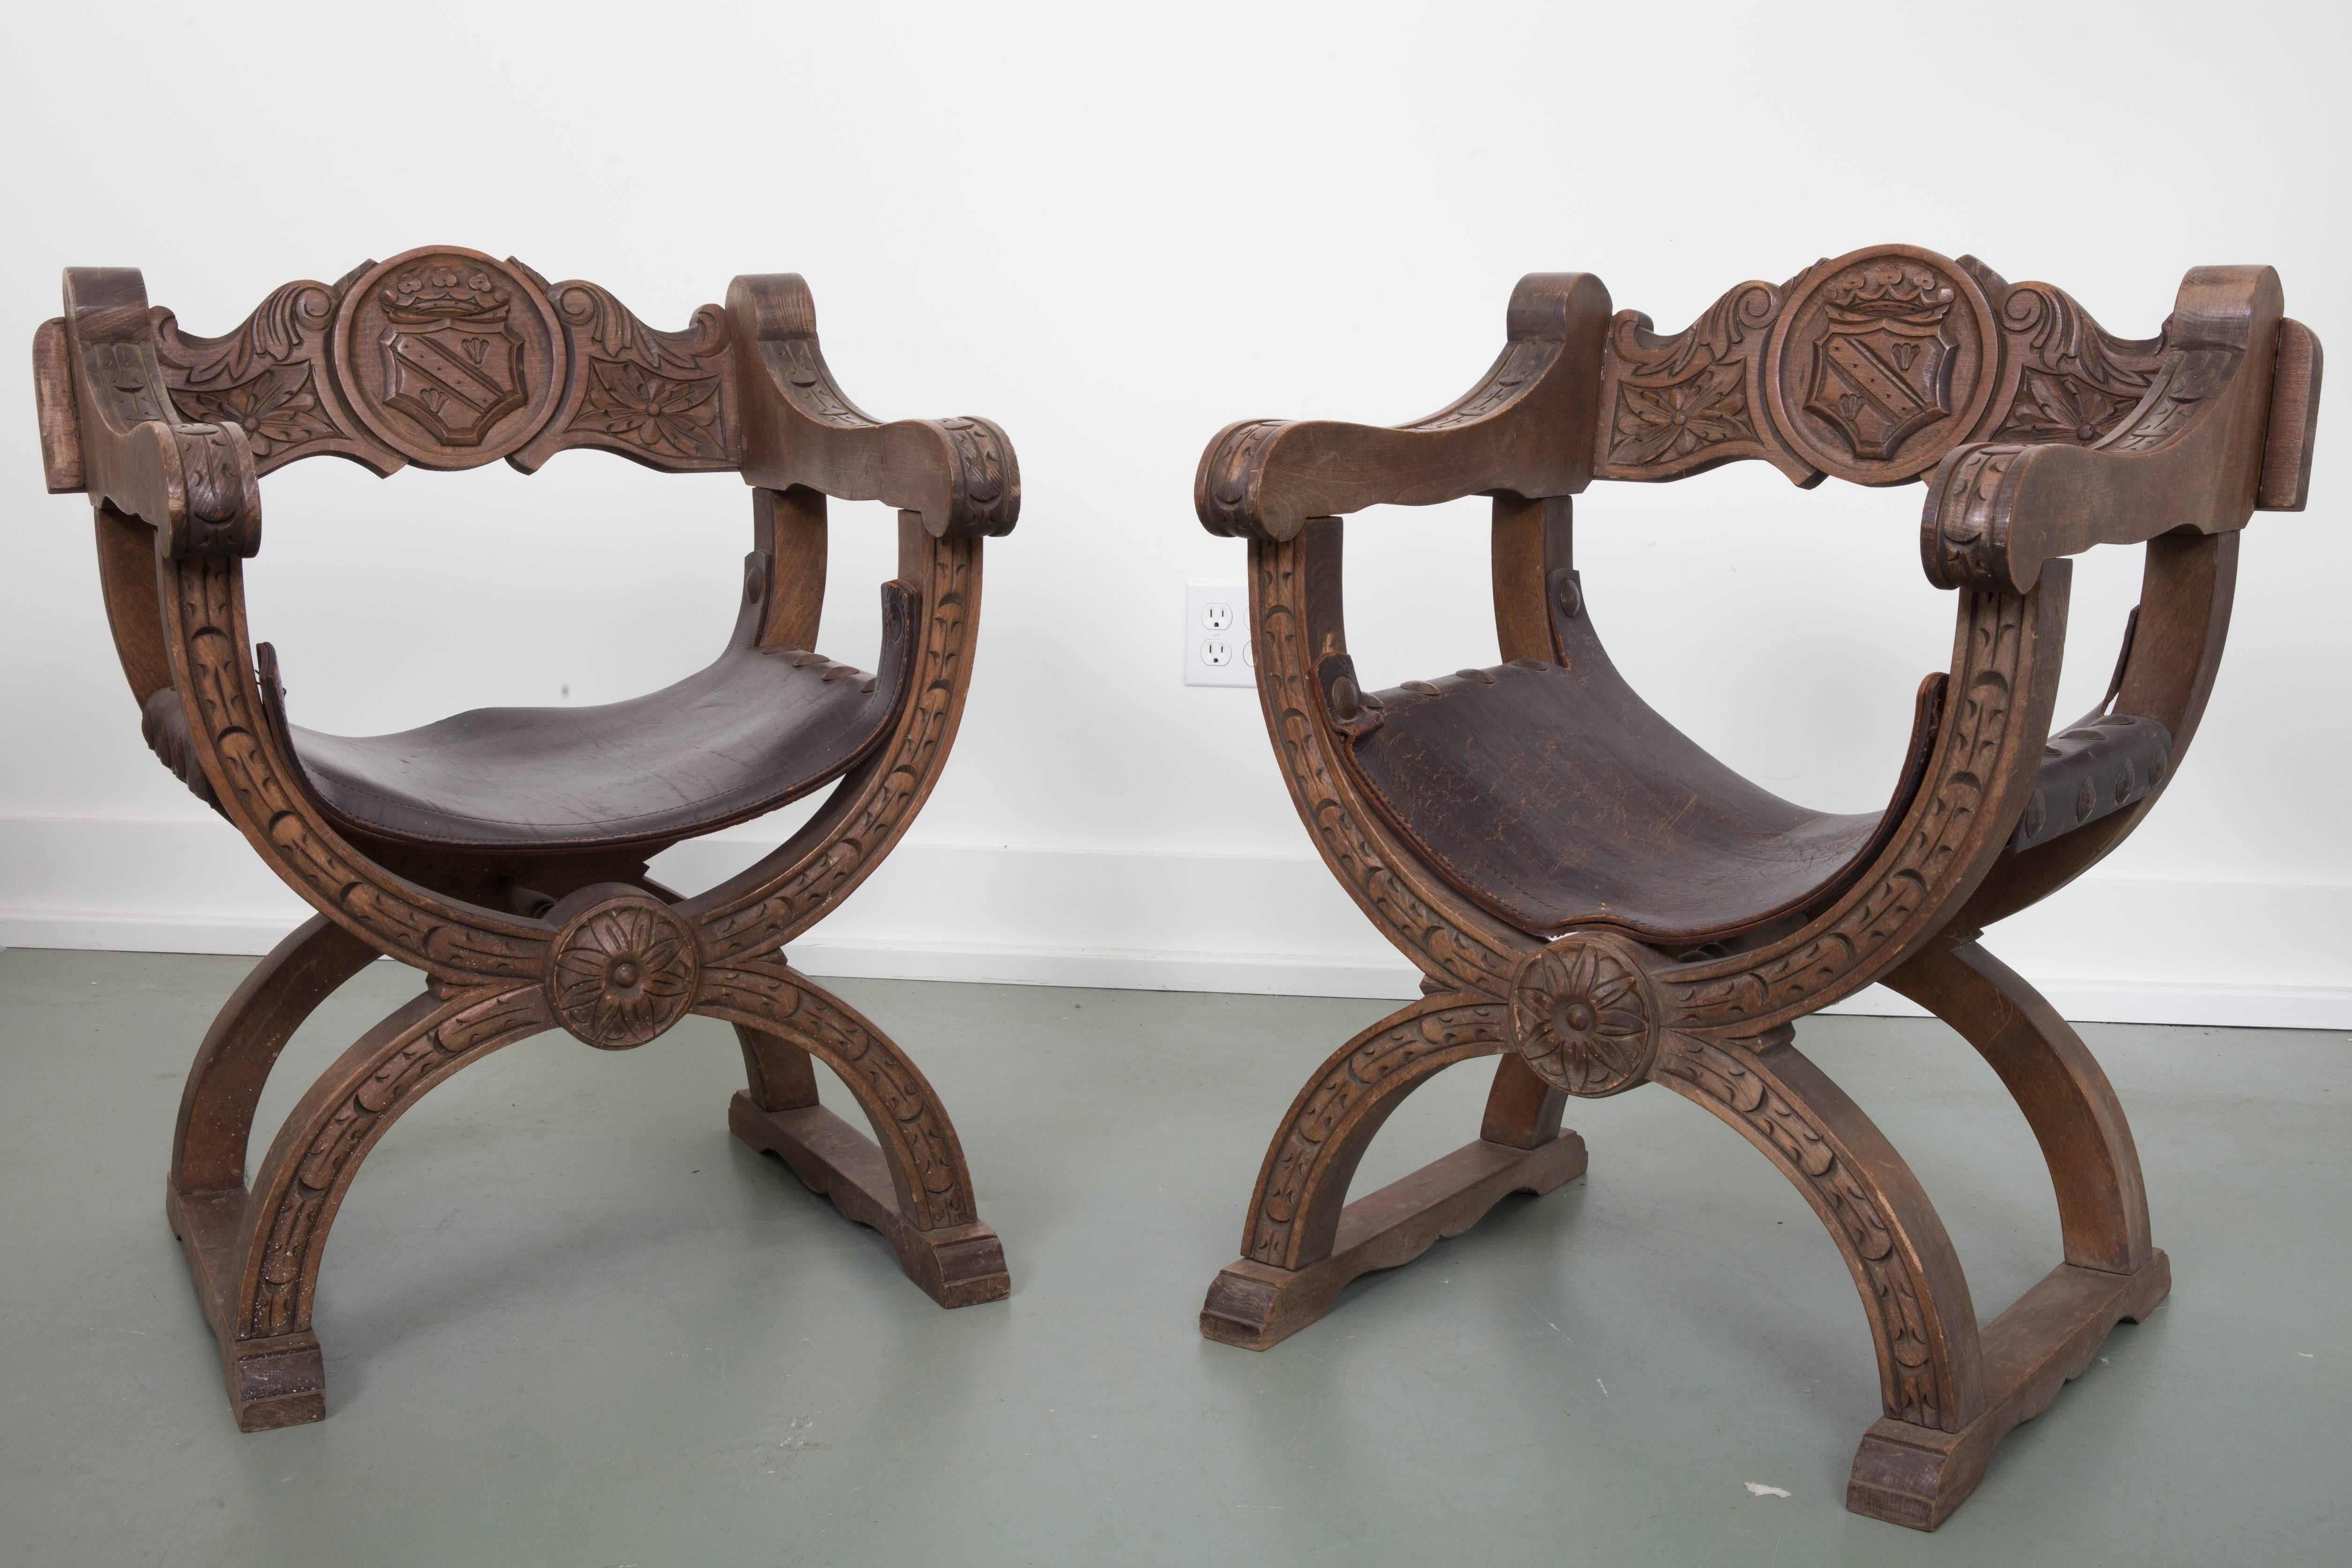 Pair of X-form Spanish Navarro Argundo chairs. Curale form seat surmounted with horizontal backsplat with carved shield and rosette raised on demilune supports joined by stretchers.